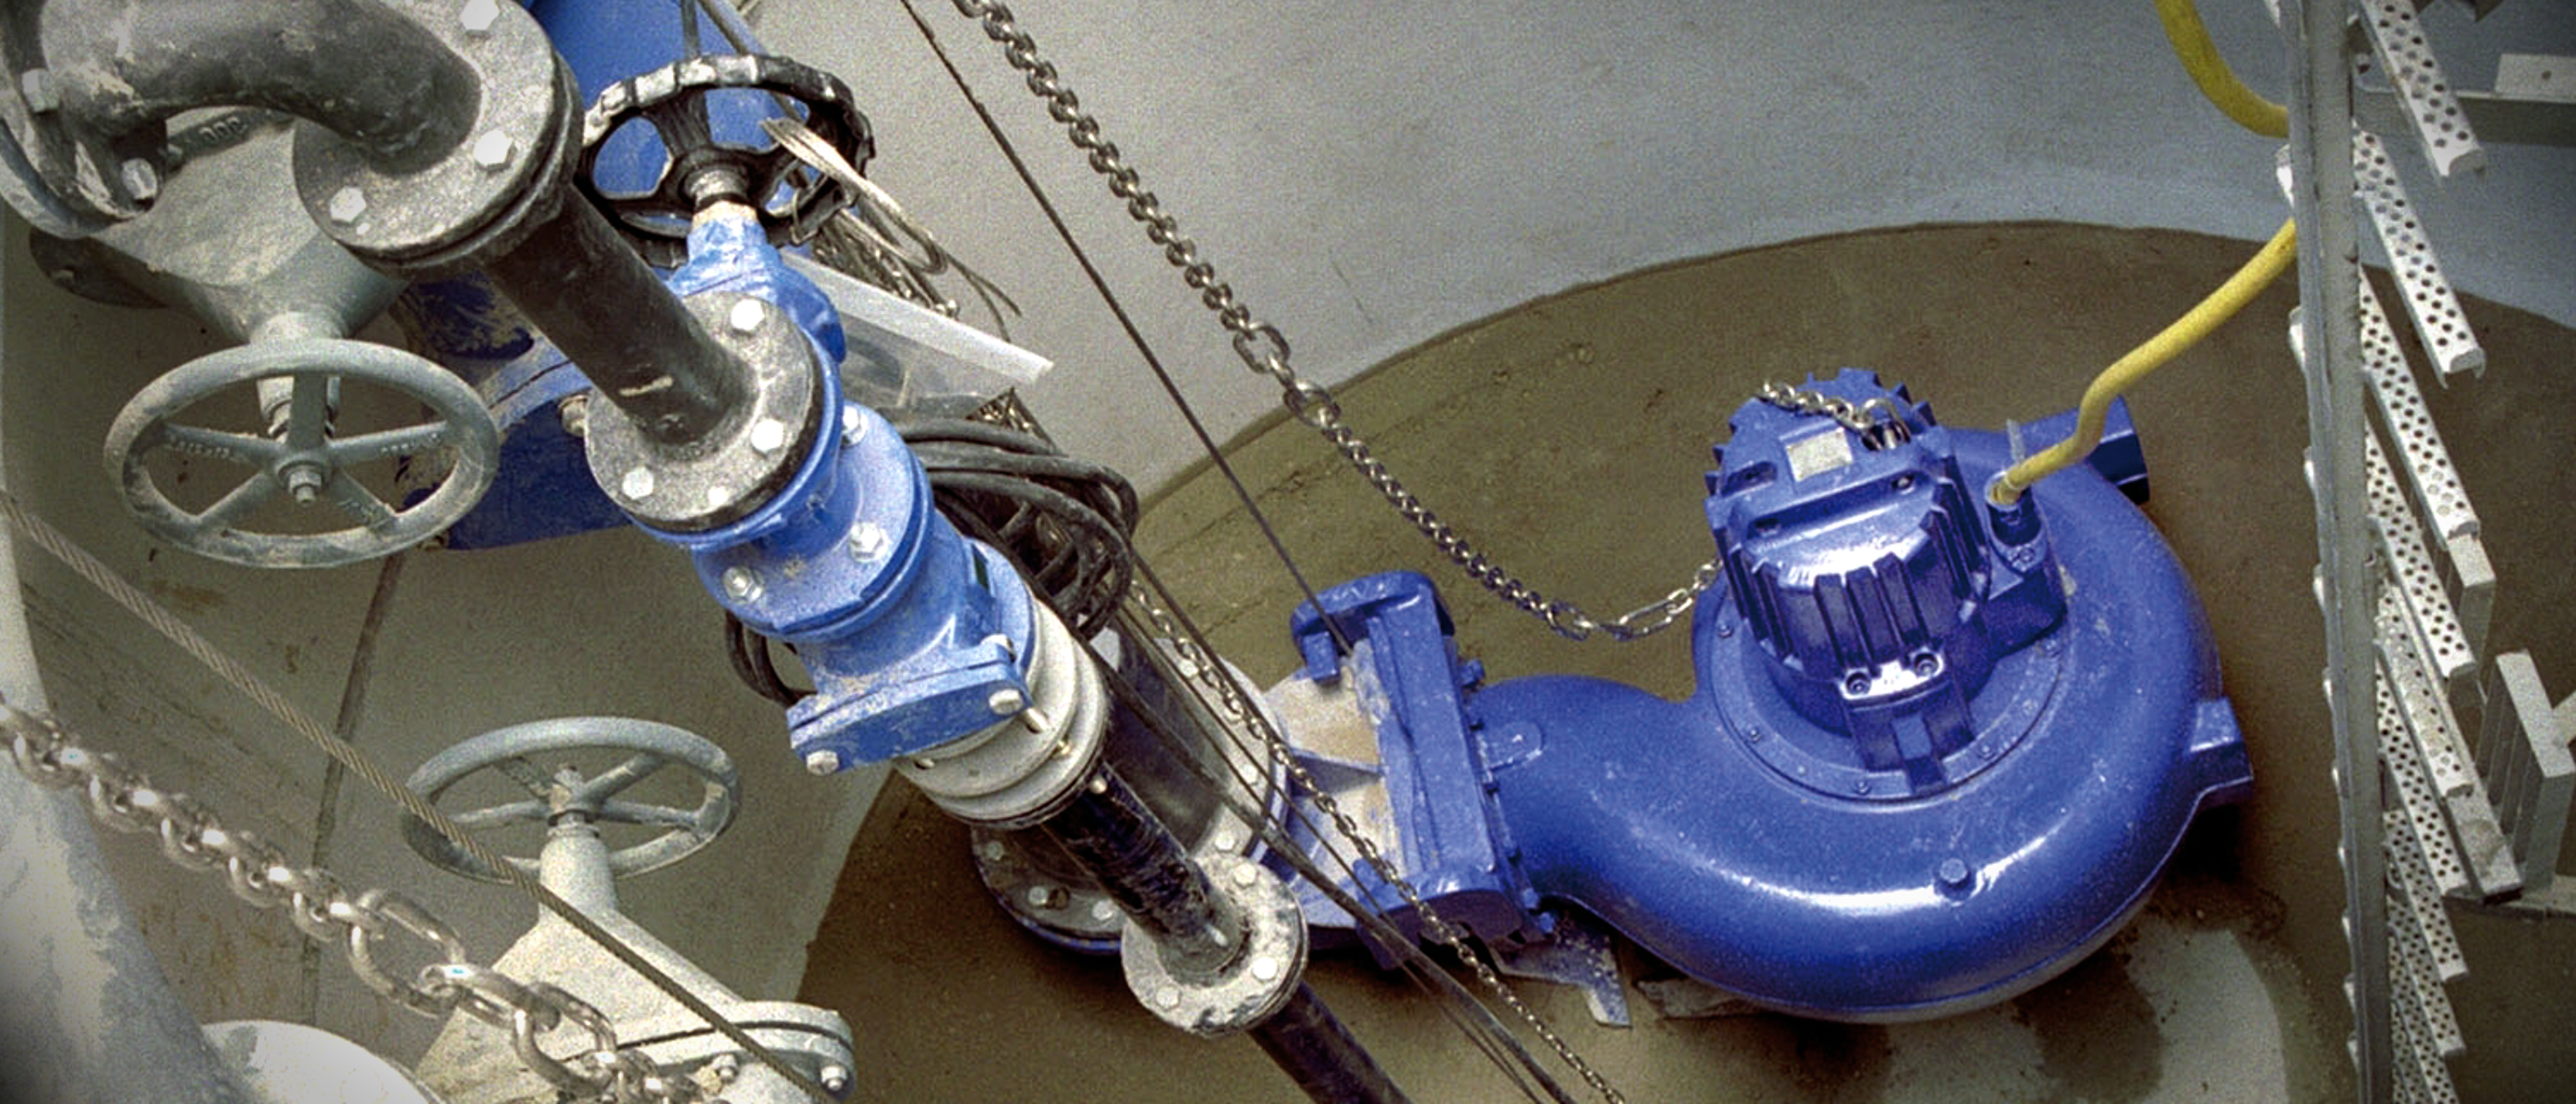 KSB submersible motor pump of the type Amarex KRT, installed on a tank floor